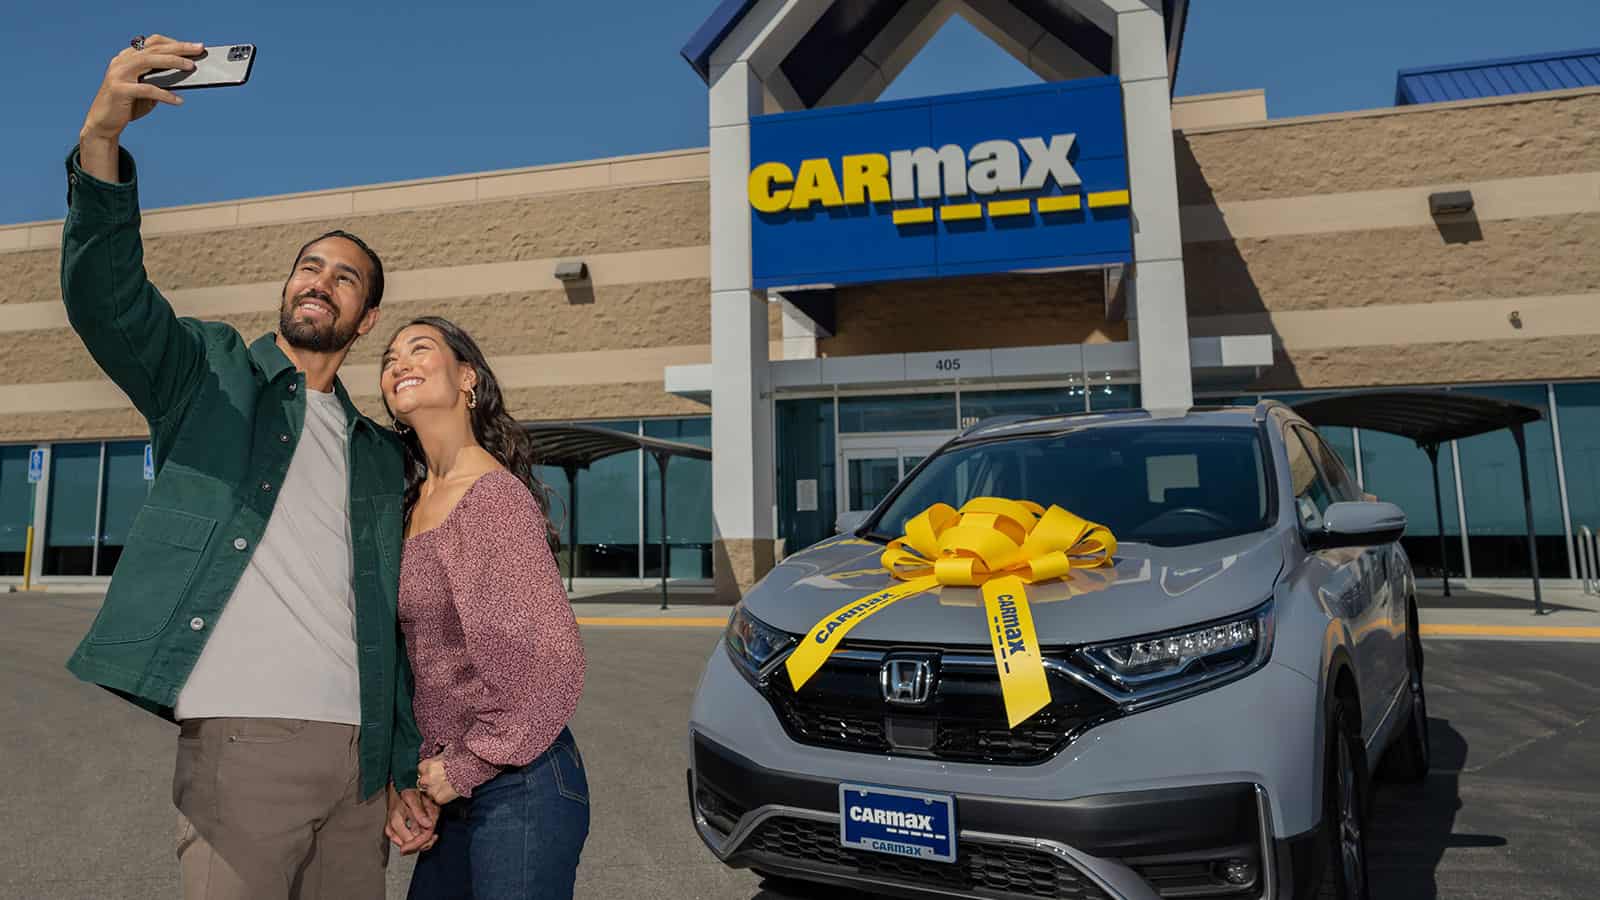 Carmax storefront with couple taking a selfie in front of an affordable car with a large yellow ribbon